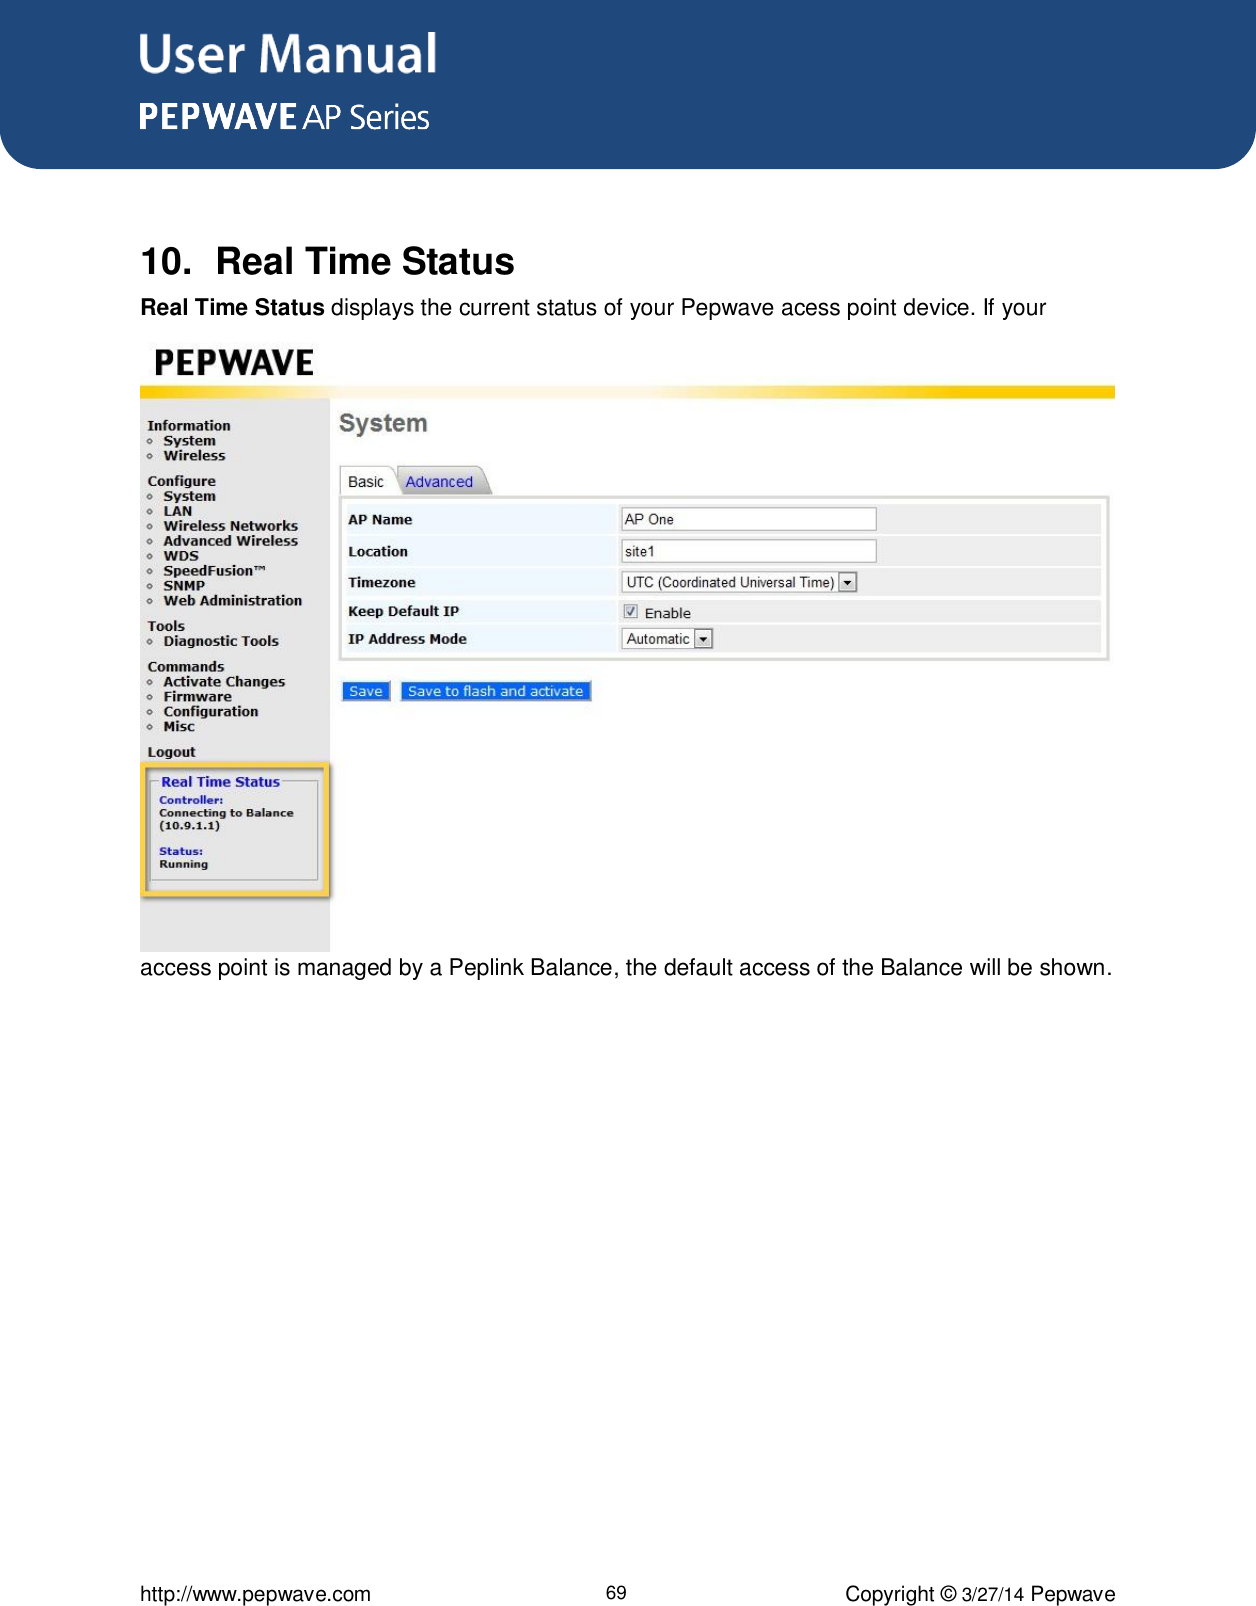 User Manual      http://www.pepwave.com 69 Copyright ©  3/27/14 Pepwave   10.  Real Time Status Real Time Status displays the current status of your Pepwave acess point device. If your access point is managed by a Peplink Balance, the default access of the Balance will be shown. 